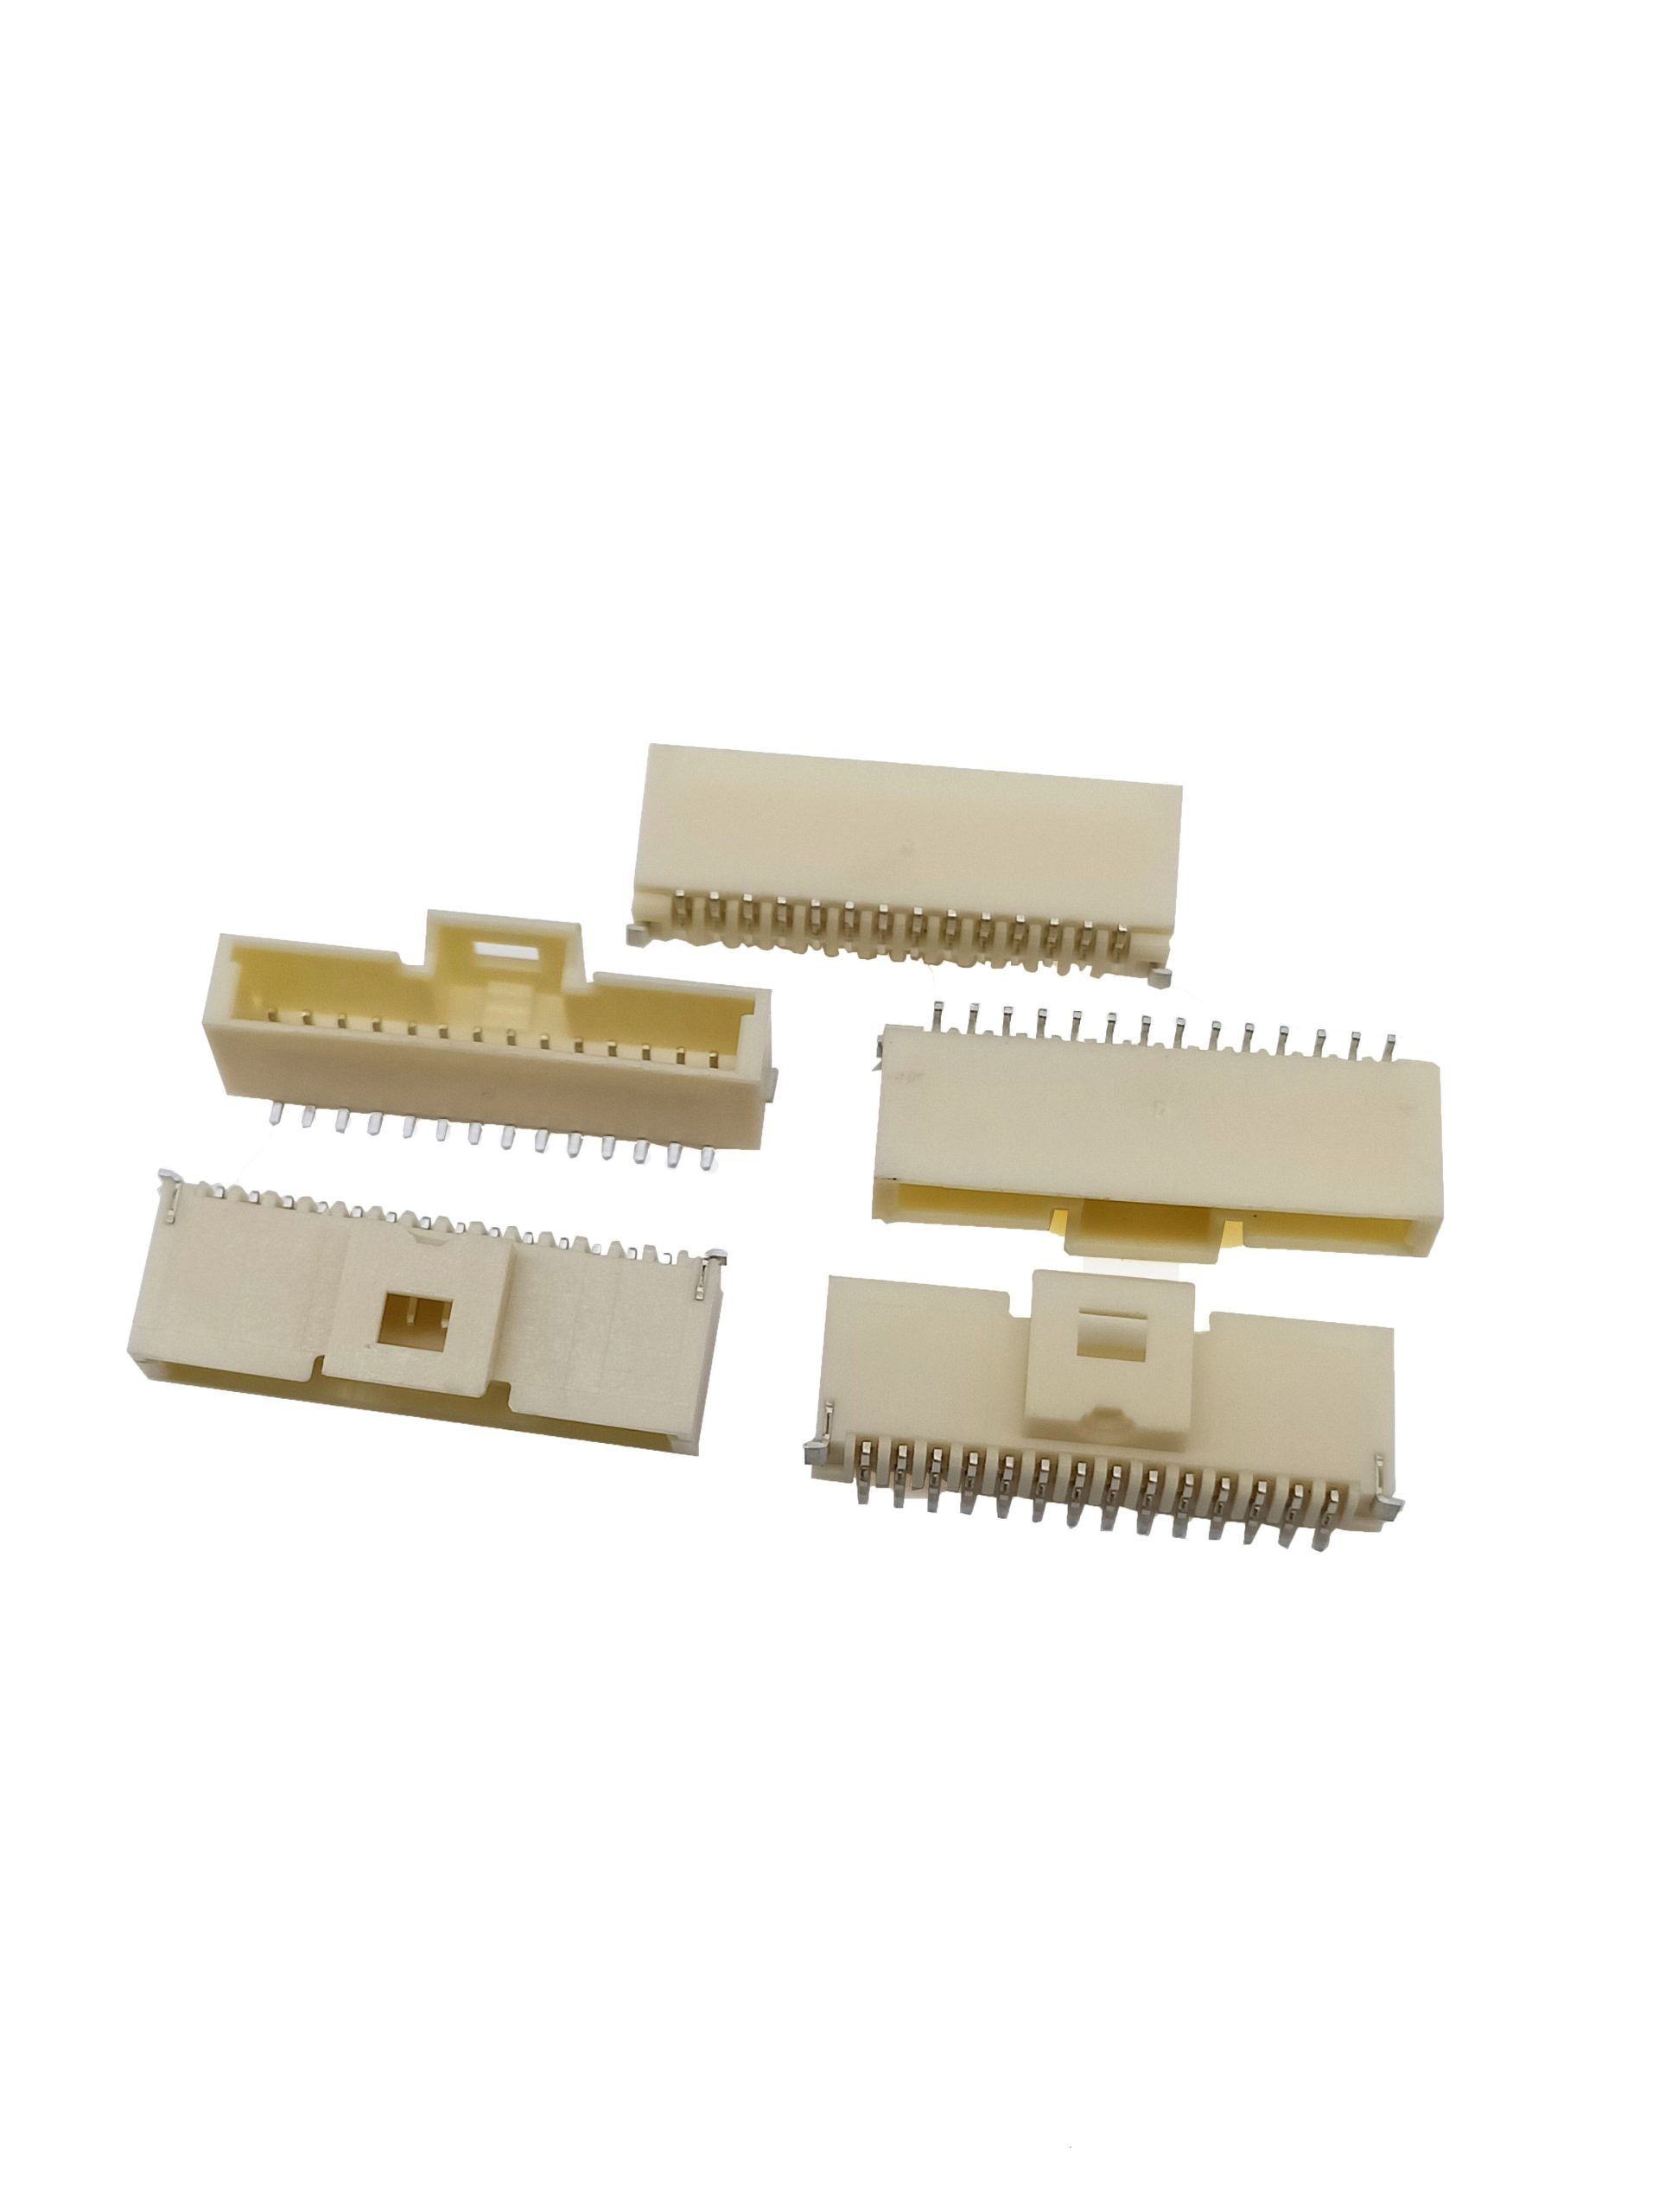 Breadboard jumper wires simplify circuit connections on breadboards, enabling convenient and efficient prototyping in electronic design and experimentation.